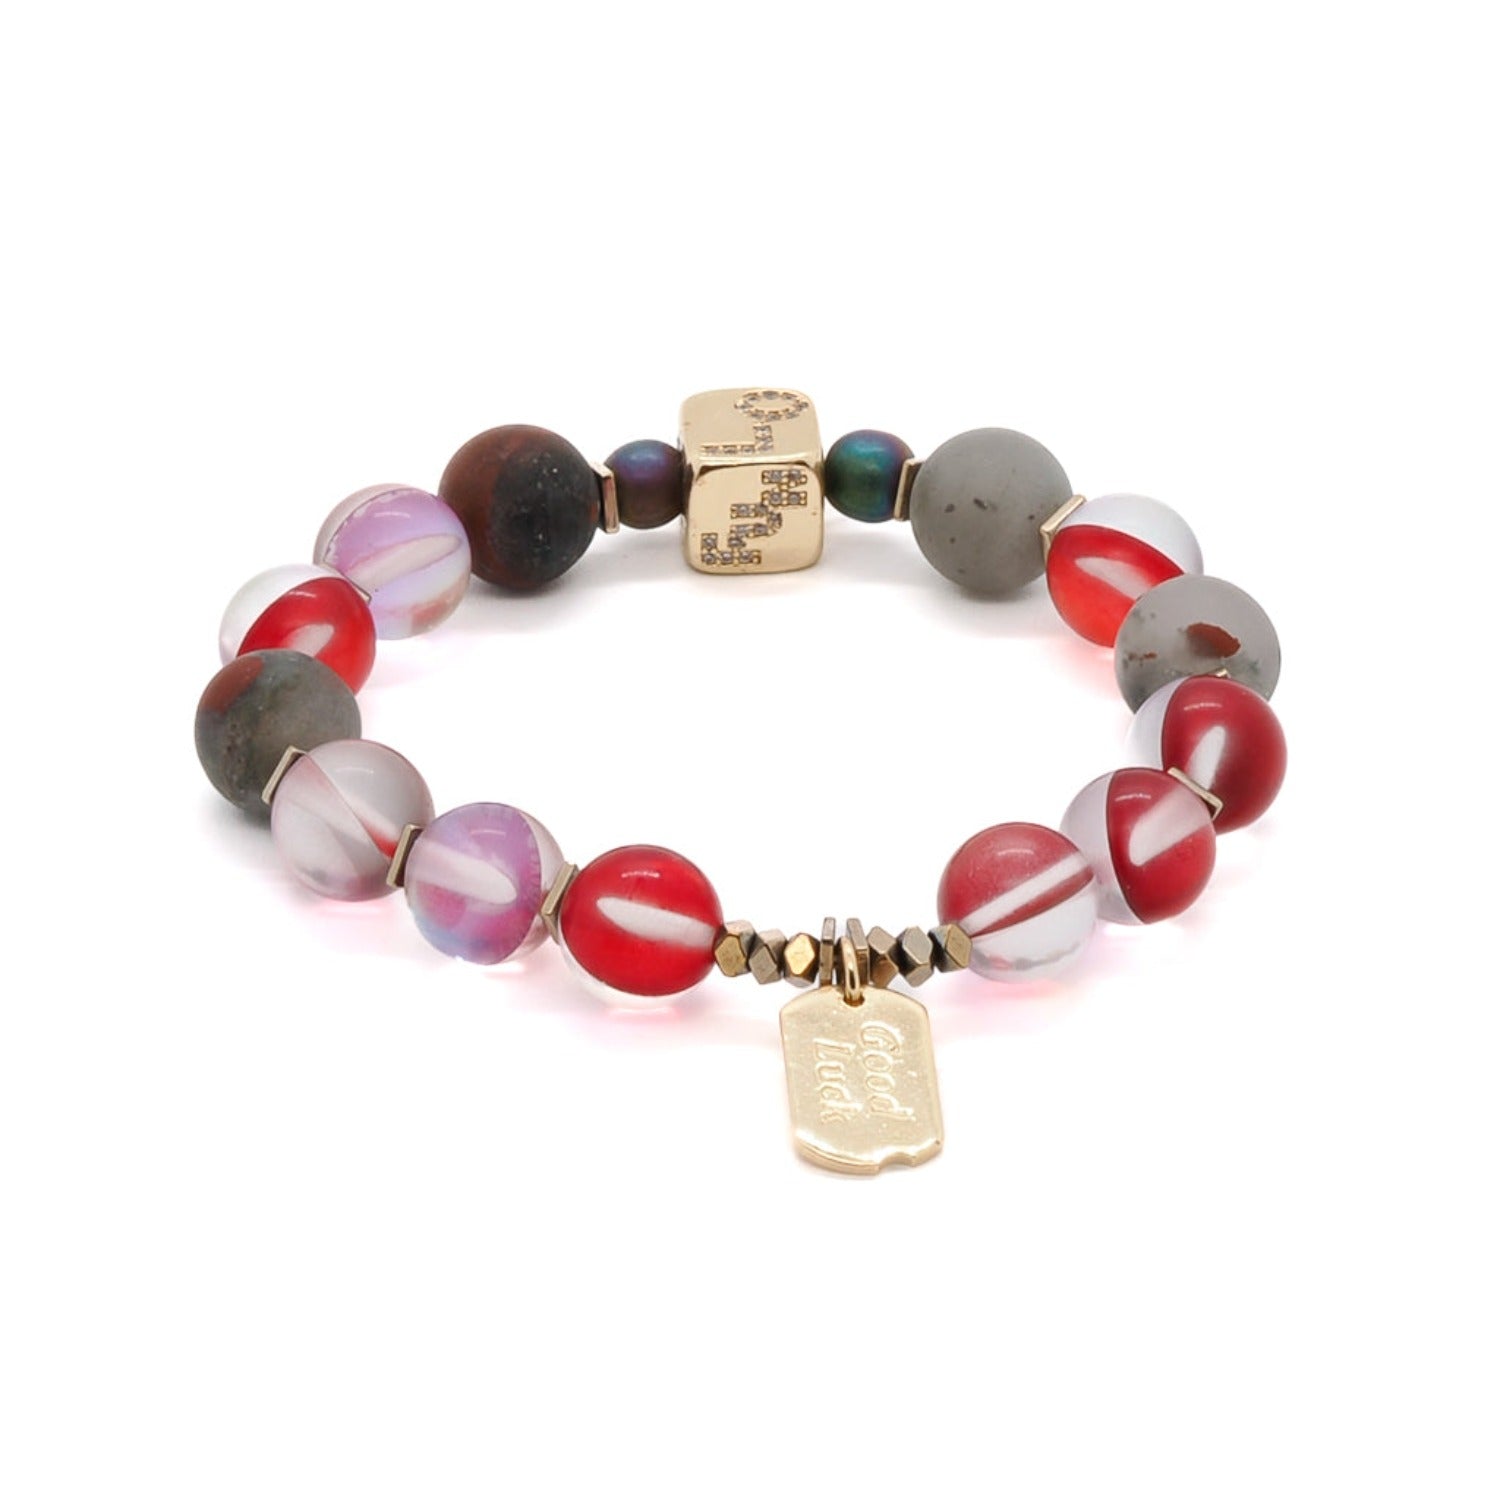 Discover the beauty of the Red & Gold Good Luck Bracelet, featuring red cat eye stone beads and gold accents.